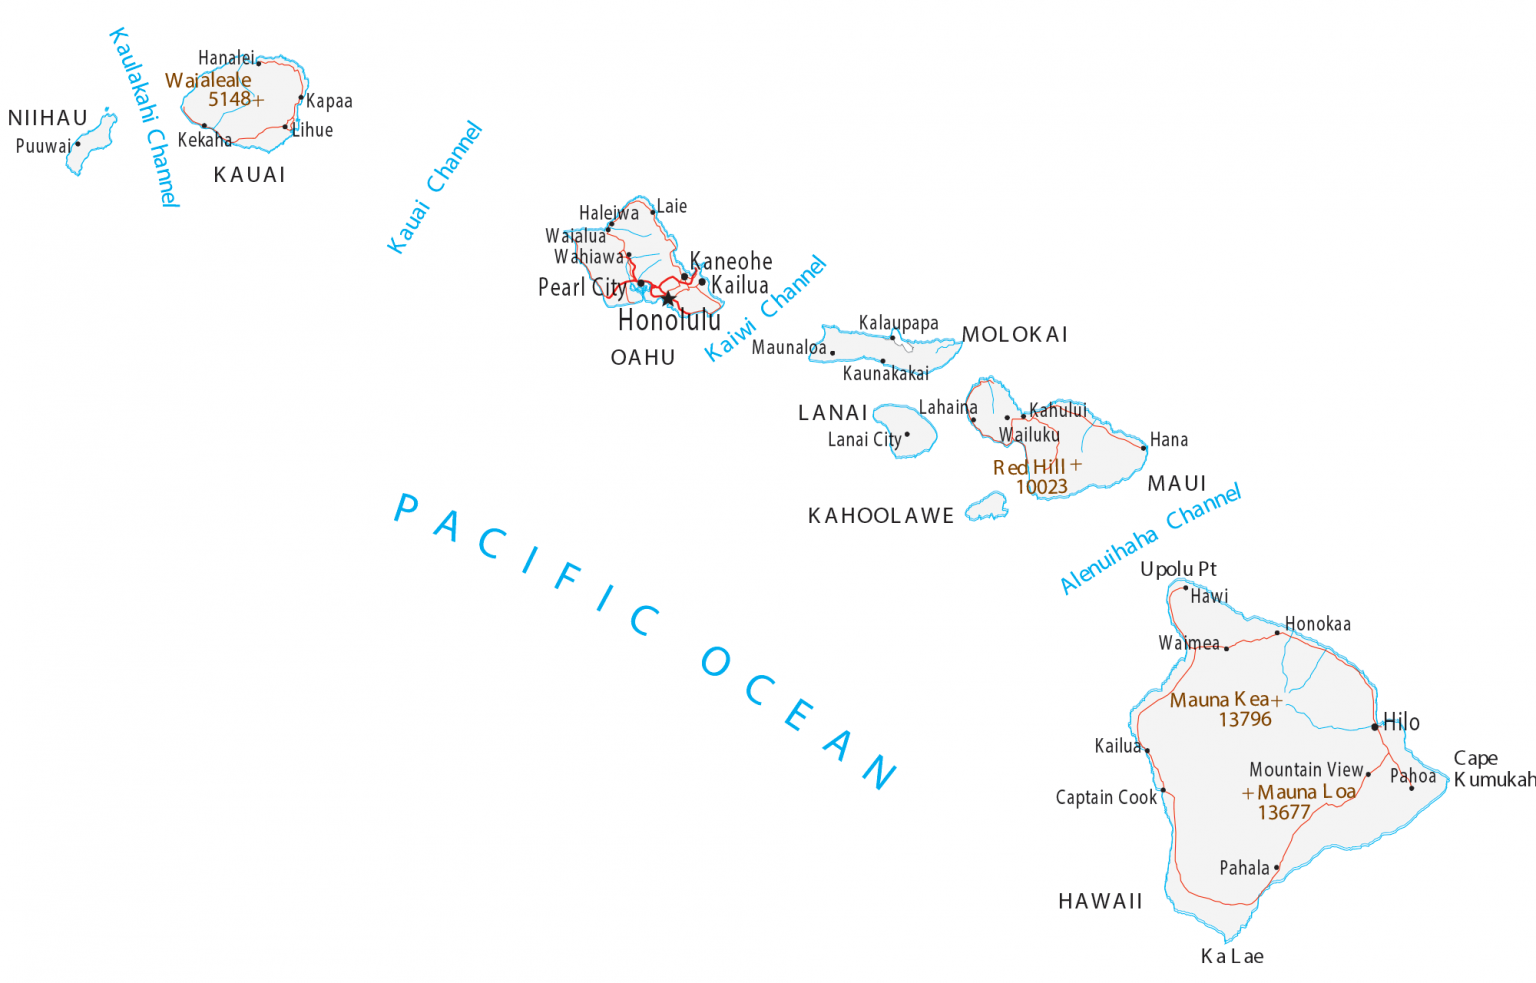 map-of-hawaii-islands-and-cities-gis-geography